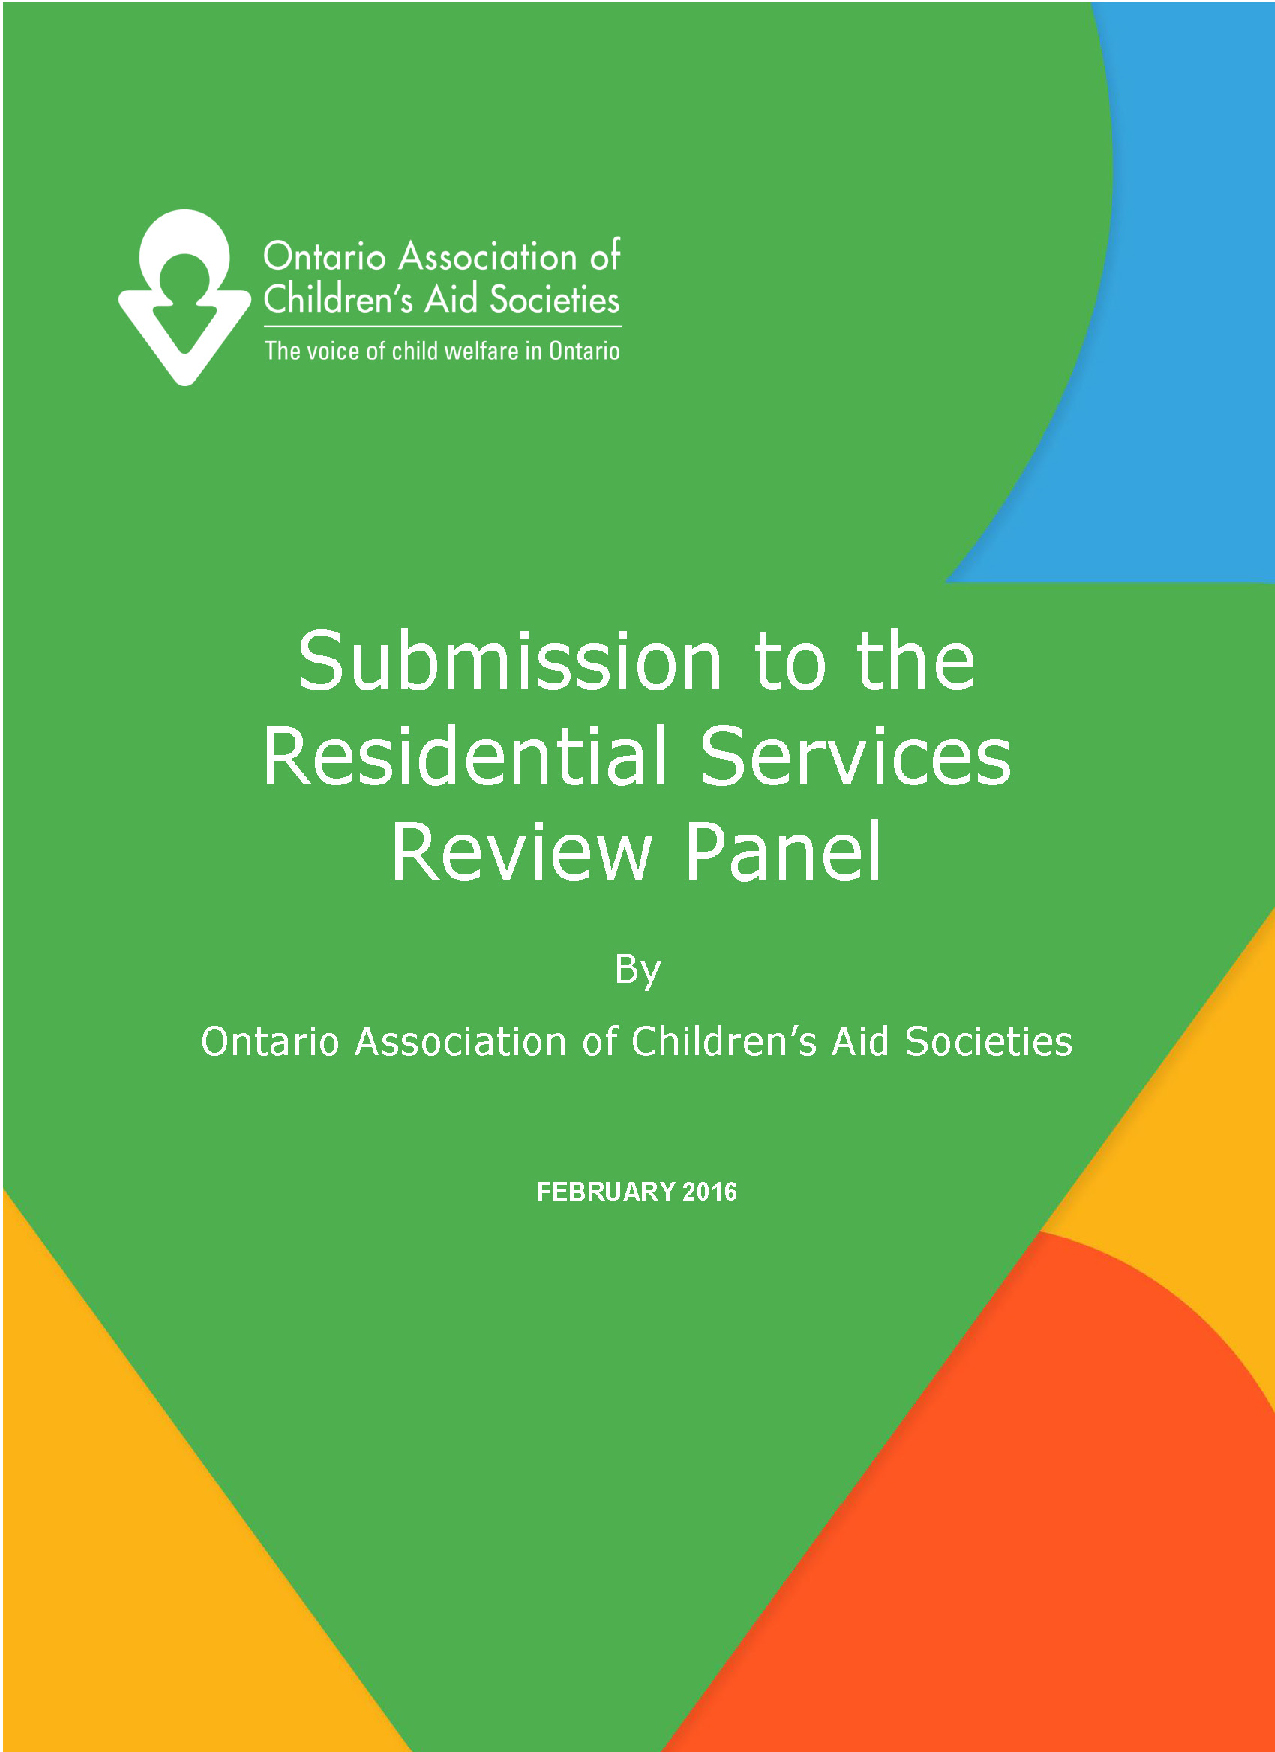 MCCSS Residential Services Review Panel’s Report and Recommendations